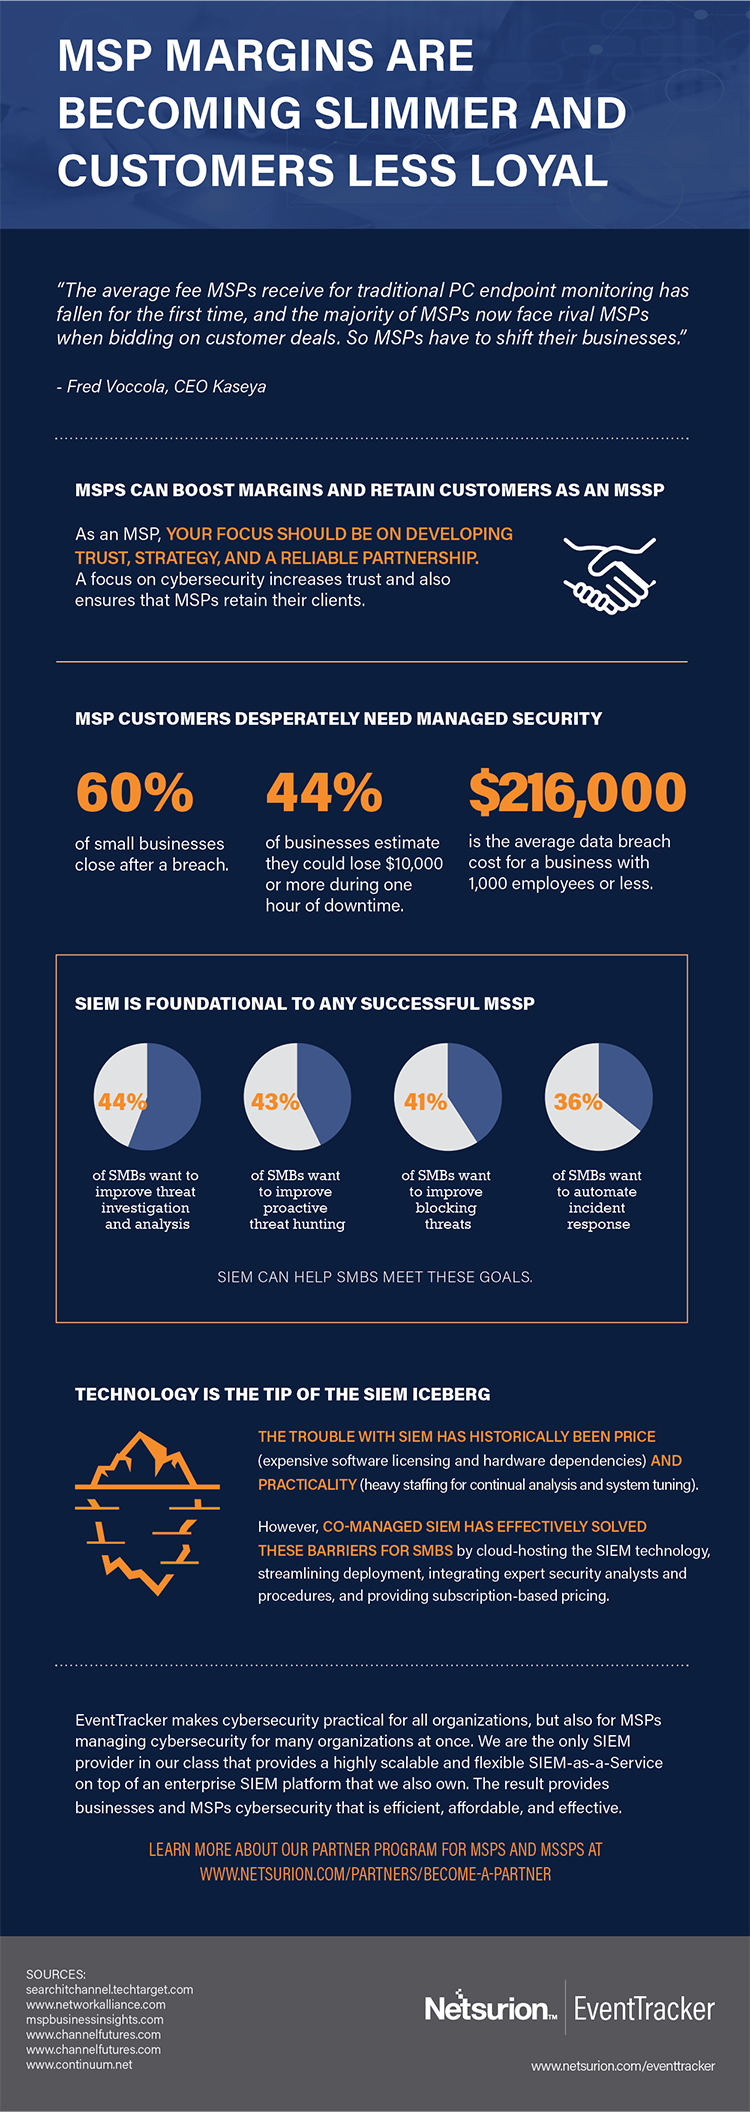 Infographic explaining why MSP Margins are Becoming Slimmer and Customers Less Loyal.